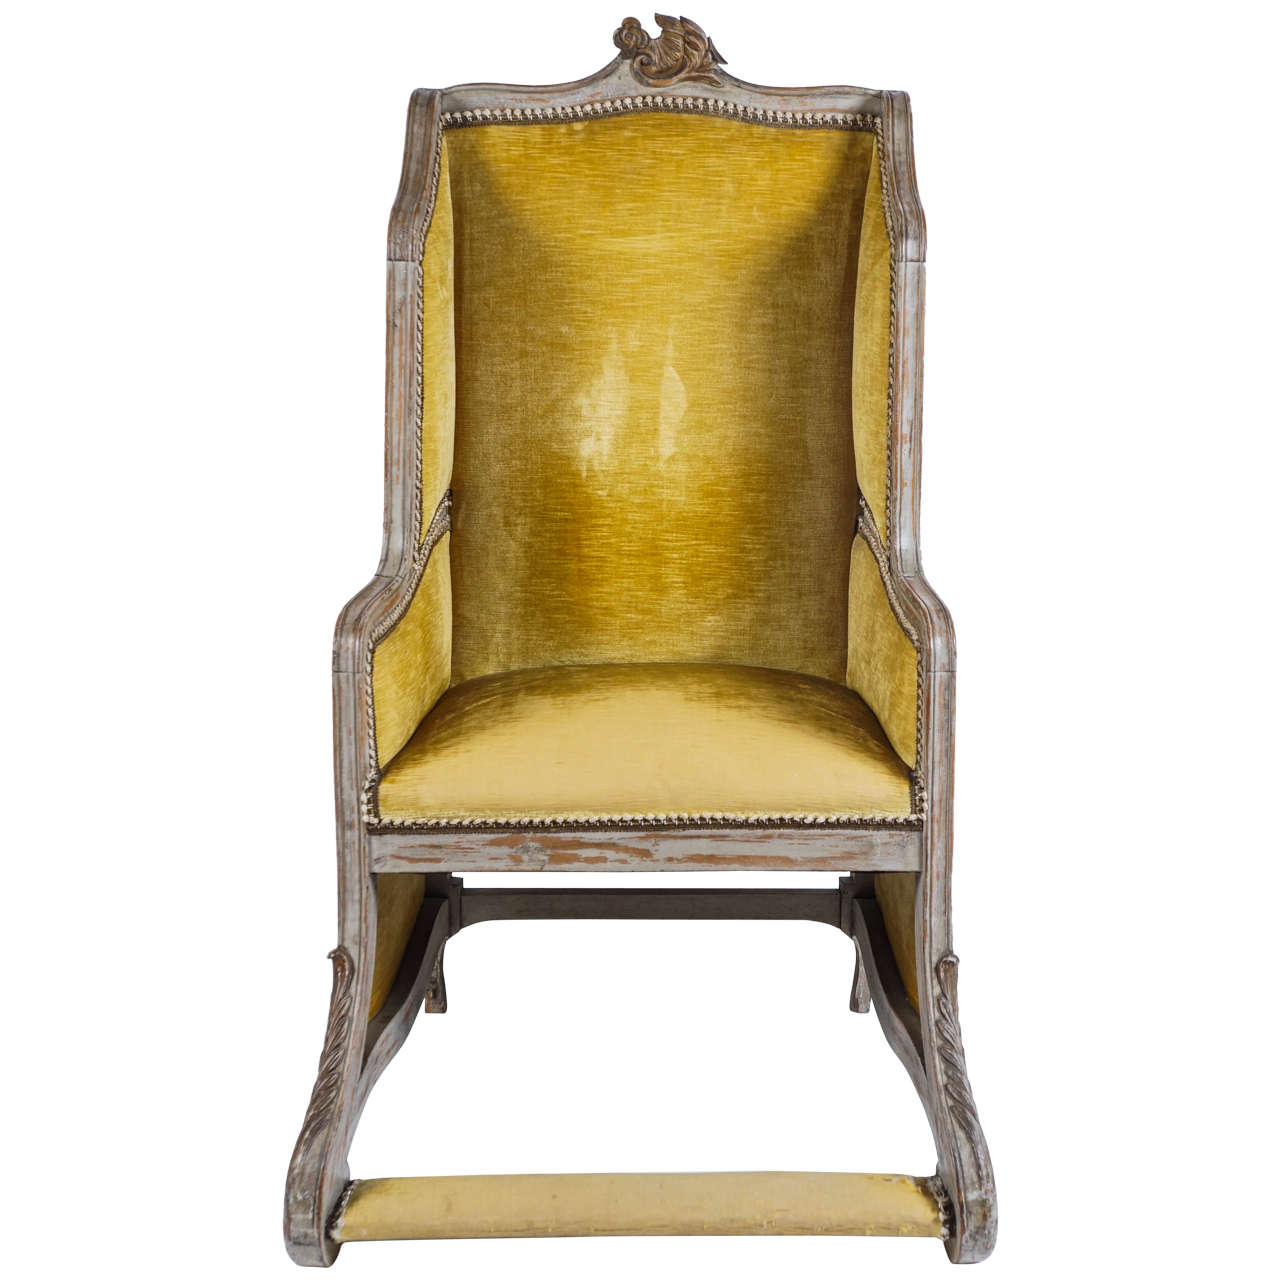 A rare French Louis XV style carved and painted bergere having crest-rail with center carved rococo foliate motif and paneled upholstered sides, back, and seat with upholstered integral footrest joined by foliate scroll form supports.  This chair